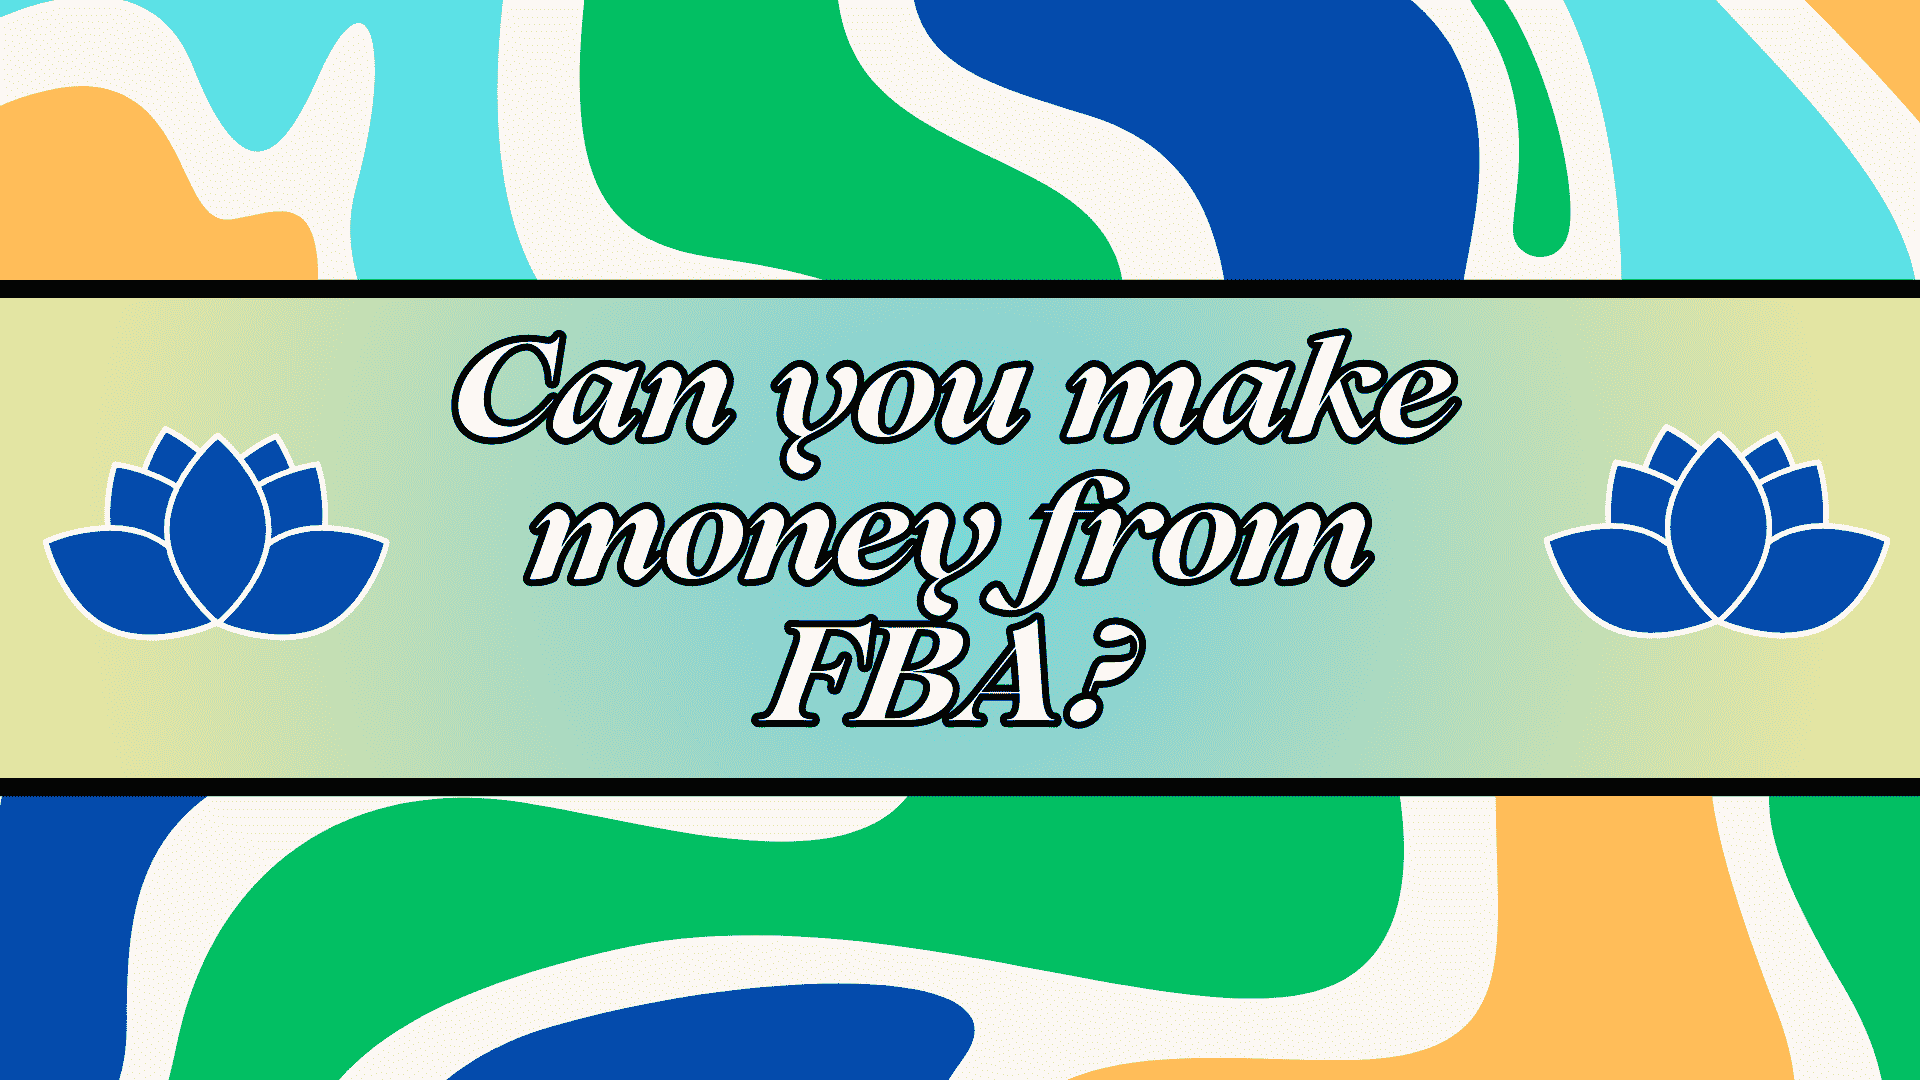 Can you make money from FBA